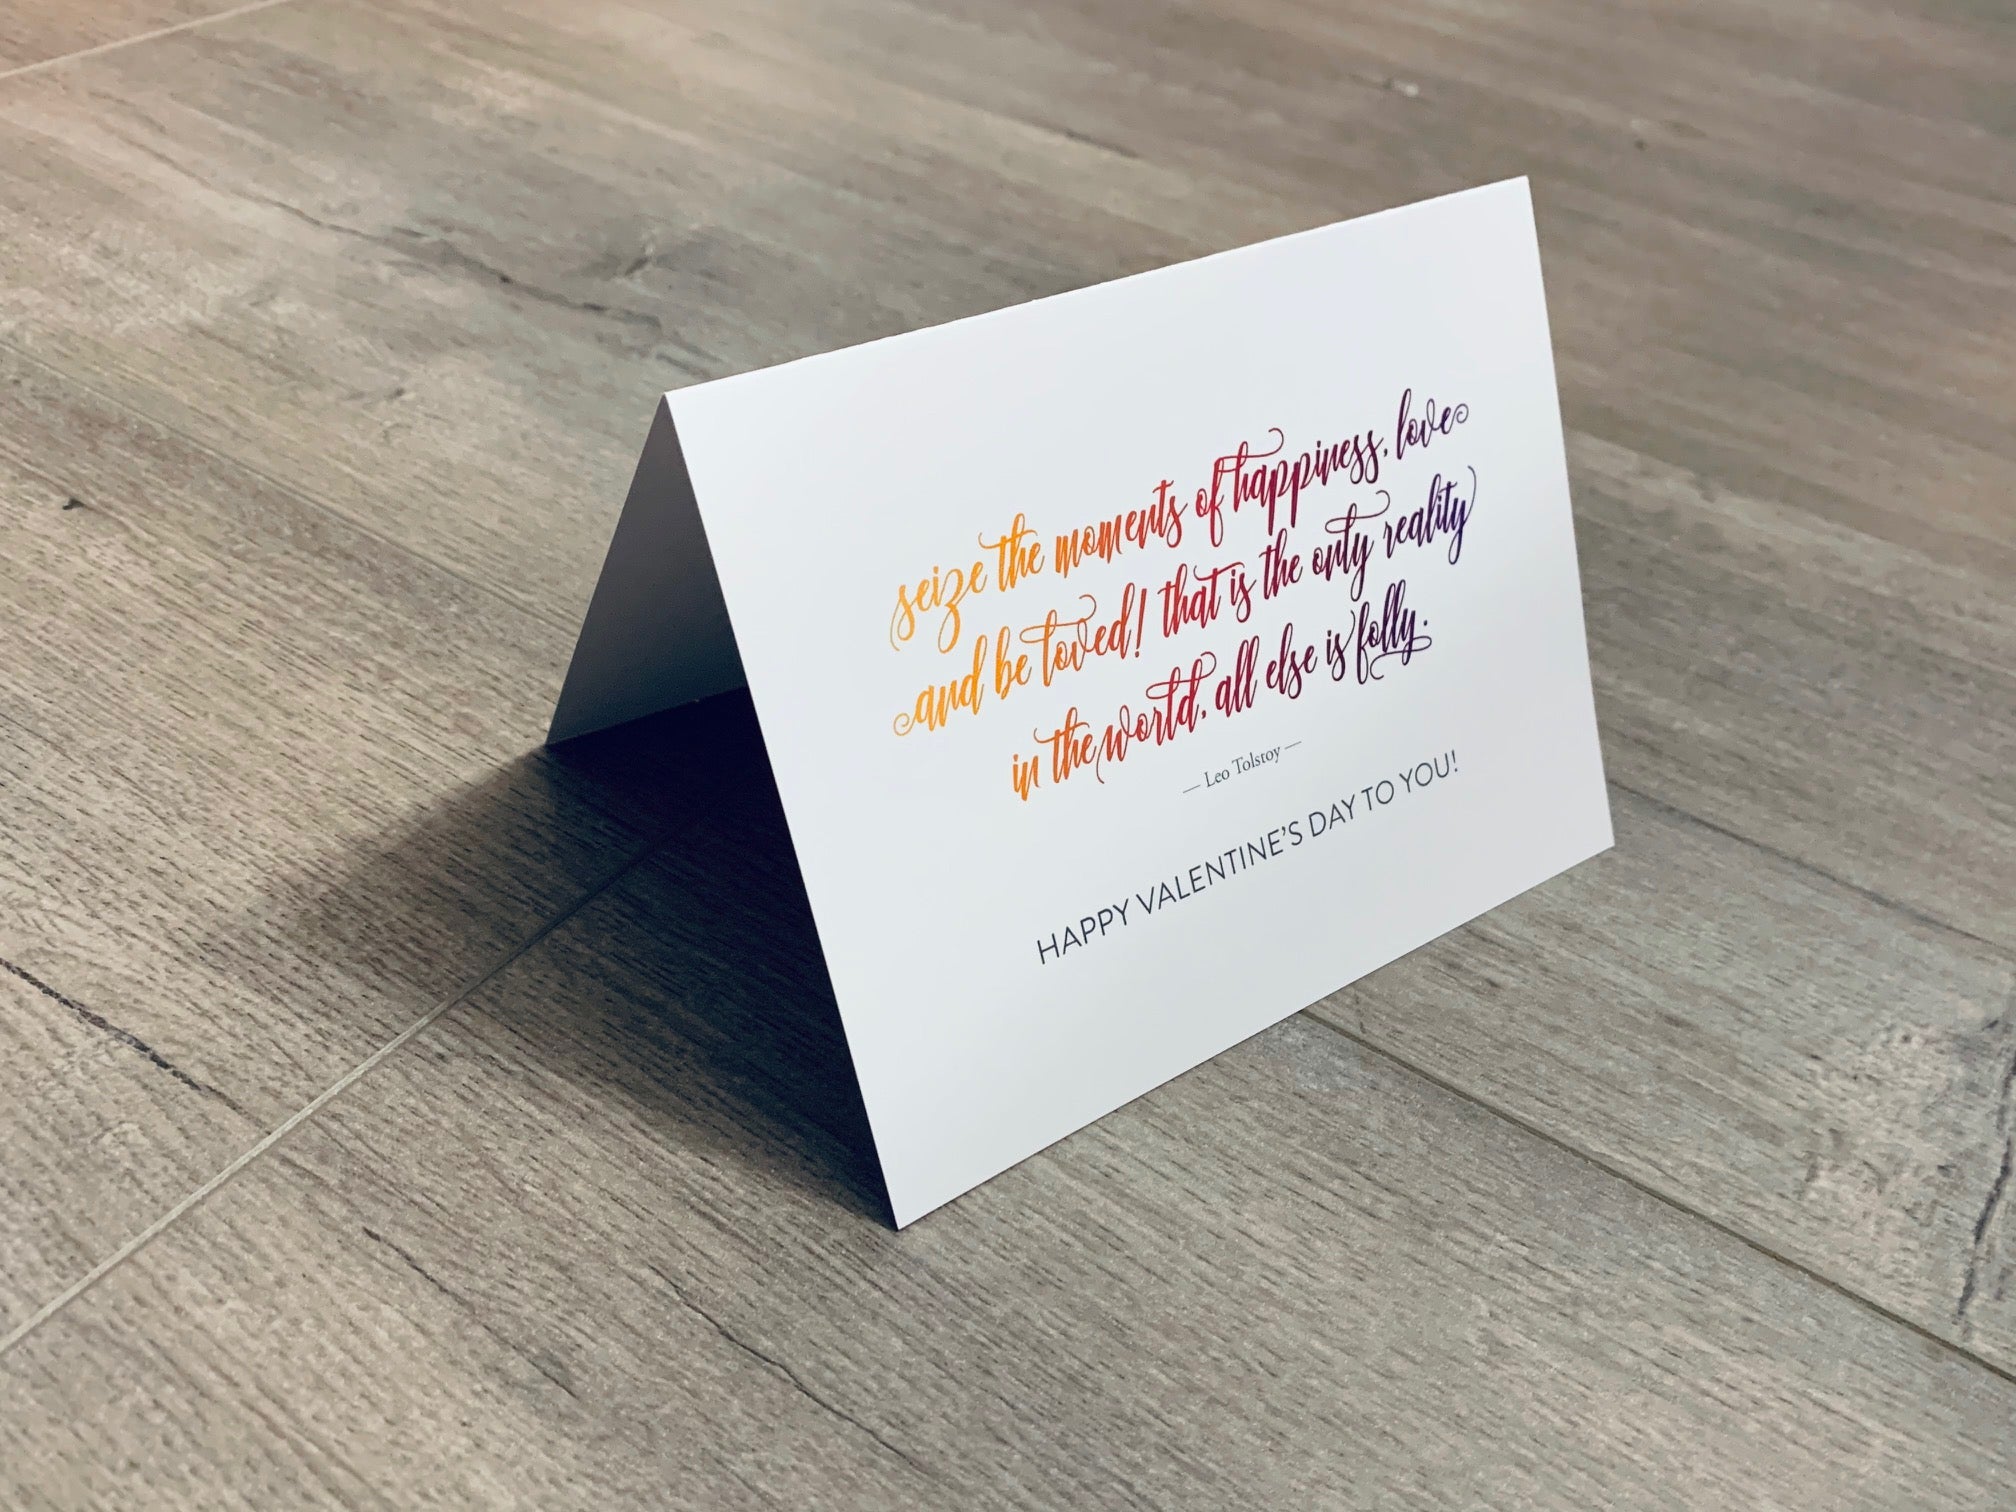 A folded white notecard is folded and propped up on a gray wooden background. The card says, "Seize the moments of happiness, love and be loved! That is the only reality in the world, all else is folly. Happy Valentine's Day to you!" Historic Love collection by Stationare.